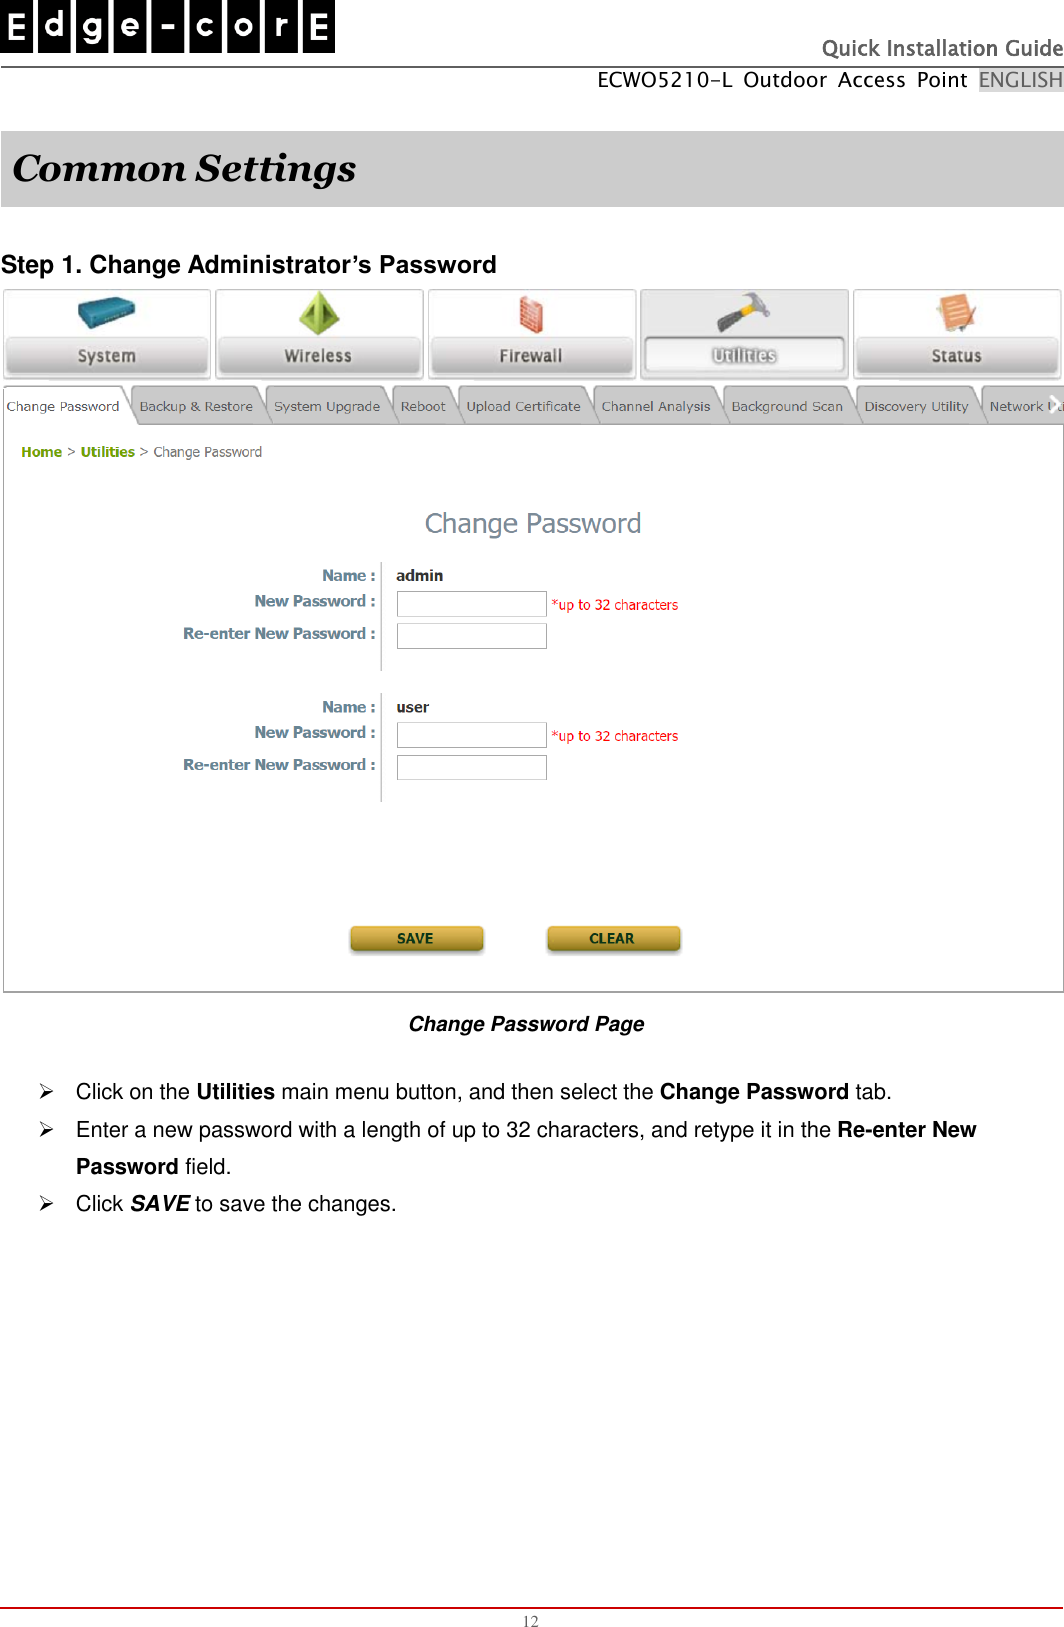   Quick Installation Guide ECWO5210-L  Outdoor  Access  Point  ENGLISH  12  Common Settings  Step 1. Change Administrator’s Password  Change Password Page   Click on the Utilities main menu button, and then select the Change Password tab.   Enter a new password with a length of up to 32 characters, and retype it in the Re-enter New Password field.   Click SAVE to save the changes.   